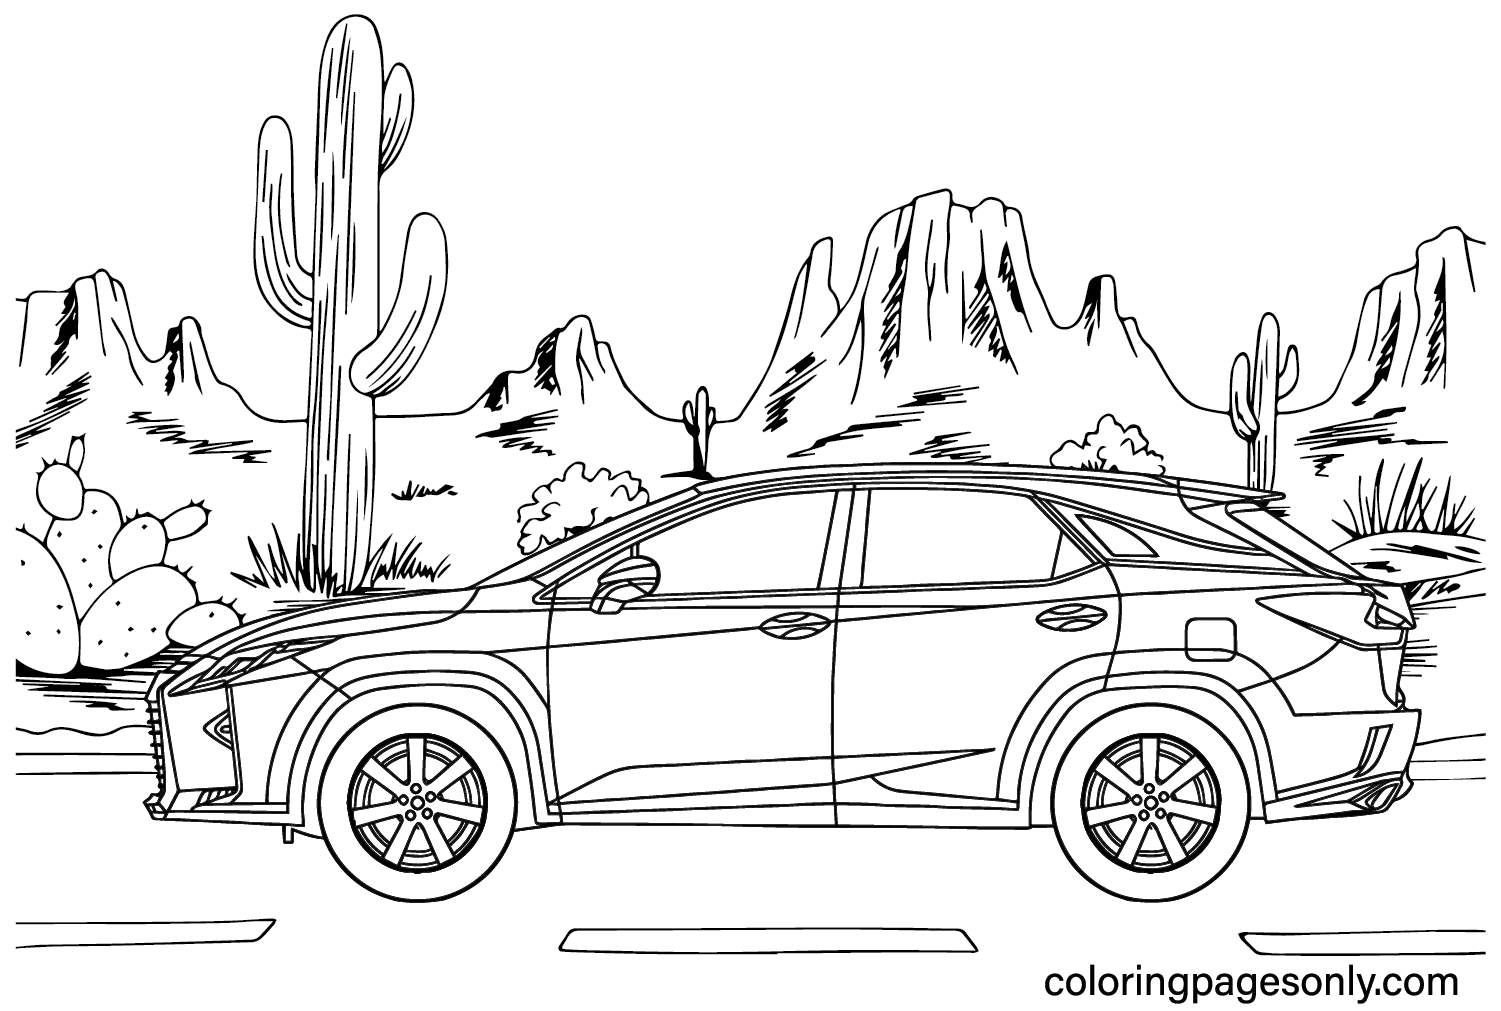 Lexus Coloring Pages to Download